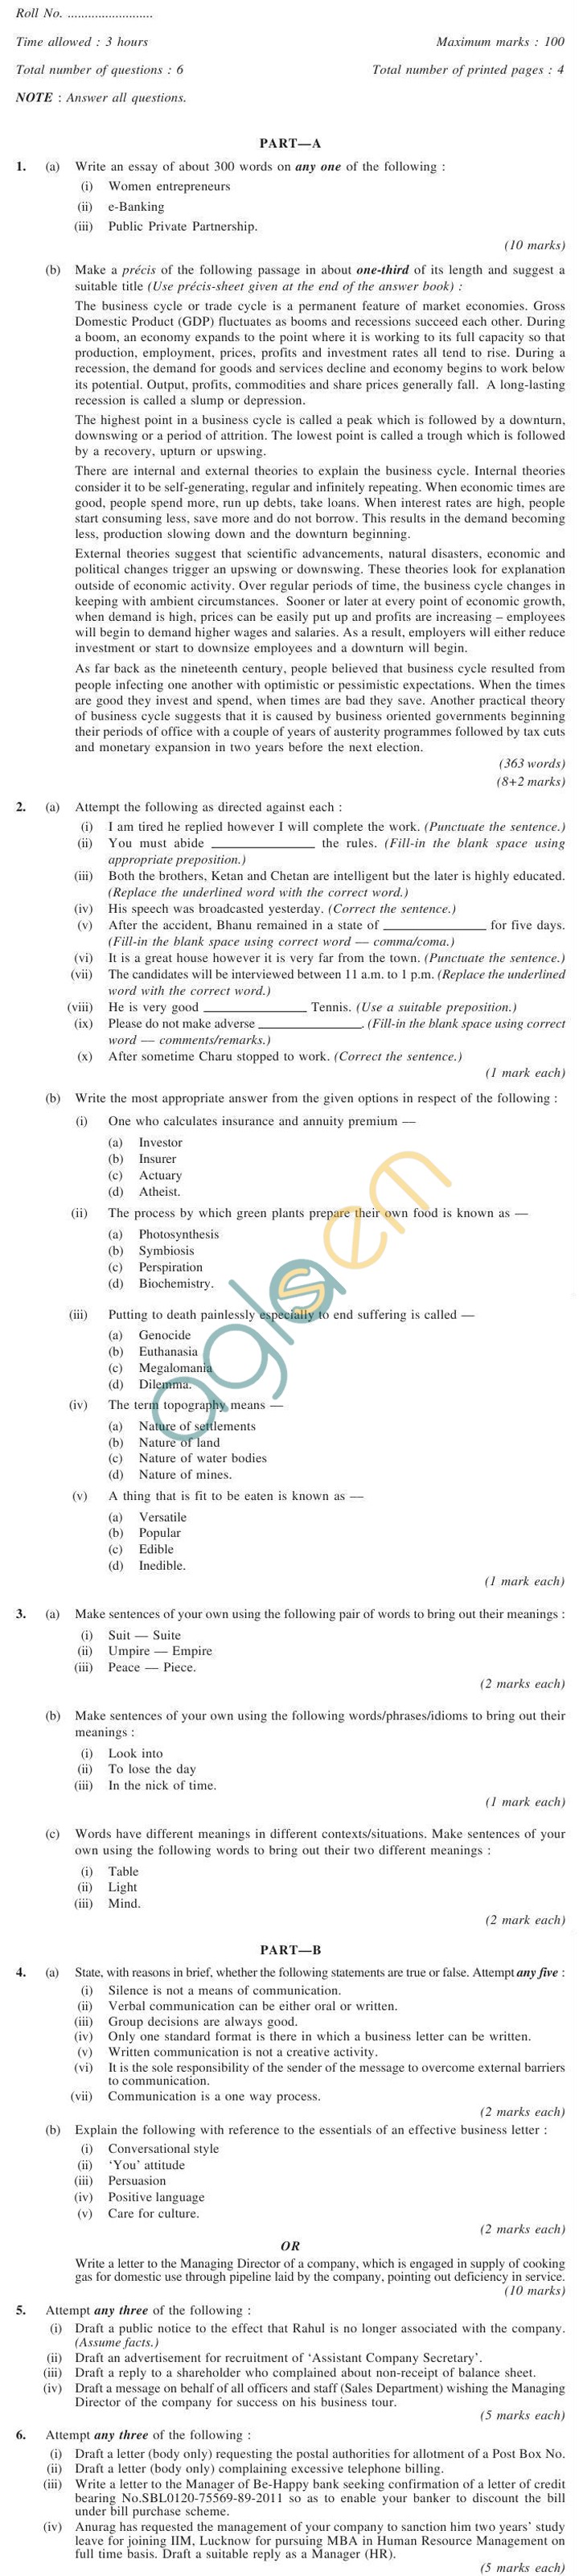 CS Foundation Question Papers Jun 2011 - Financial Accounting